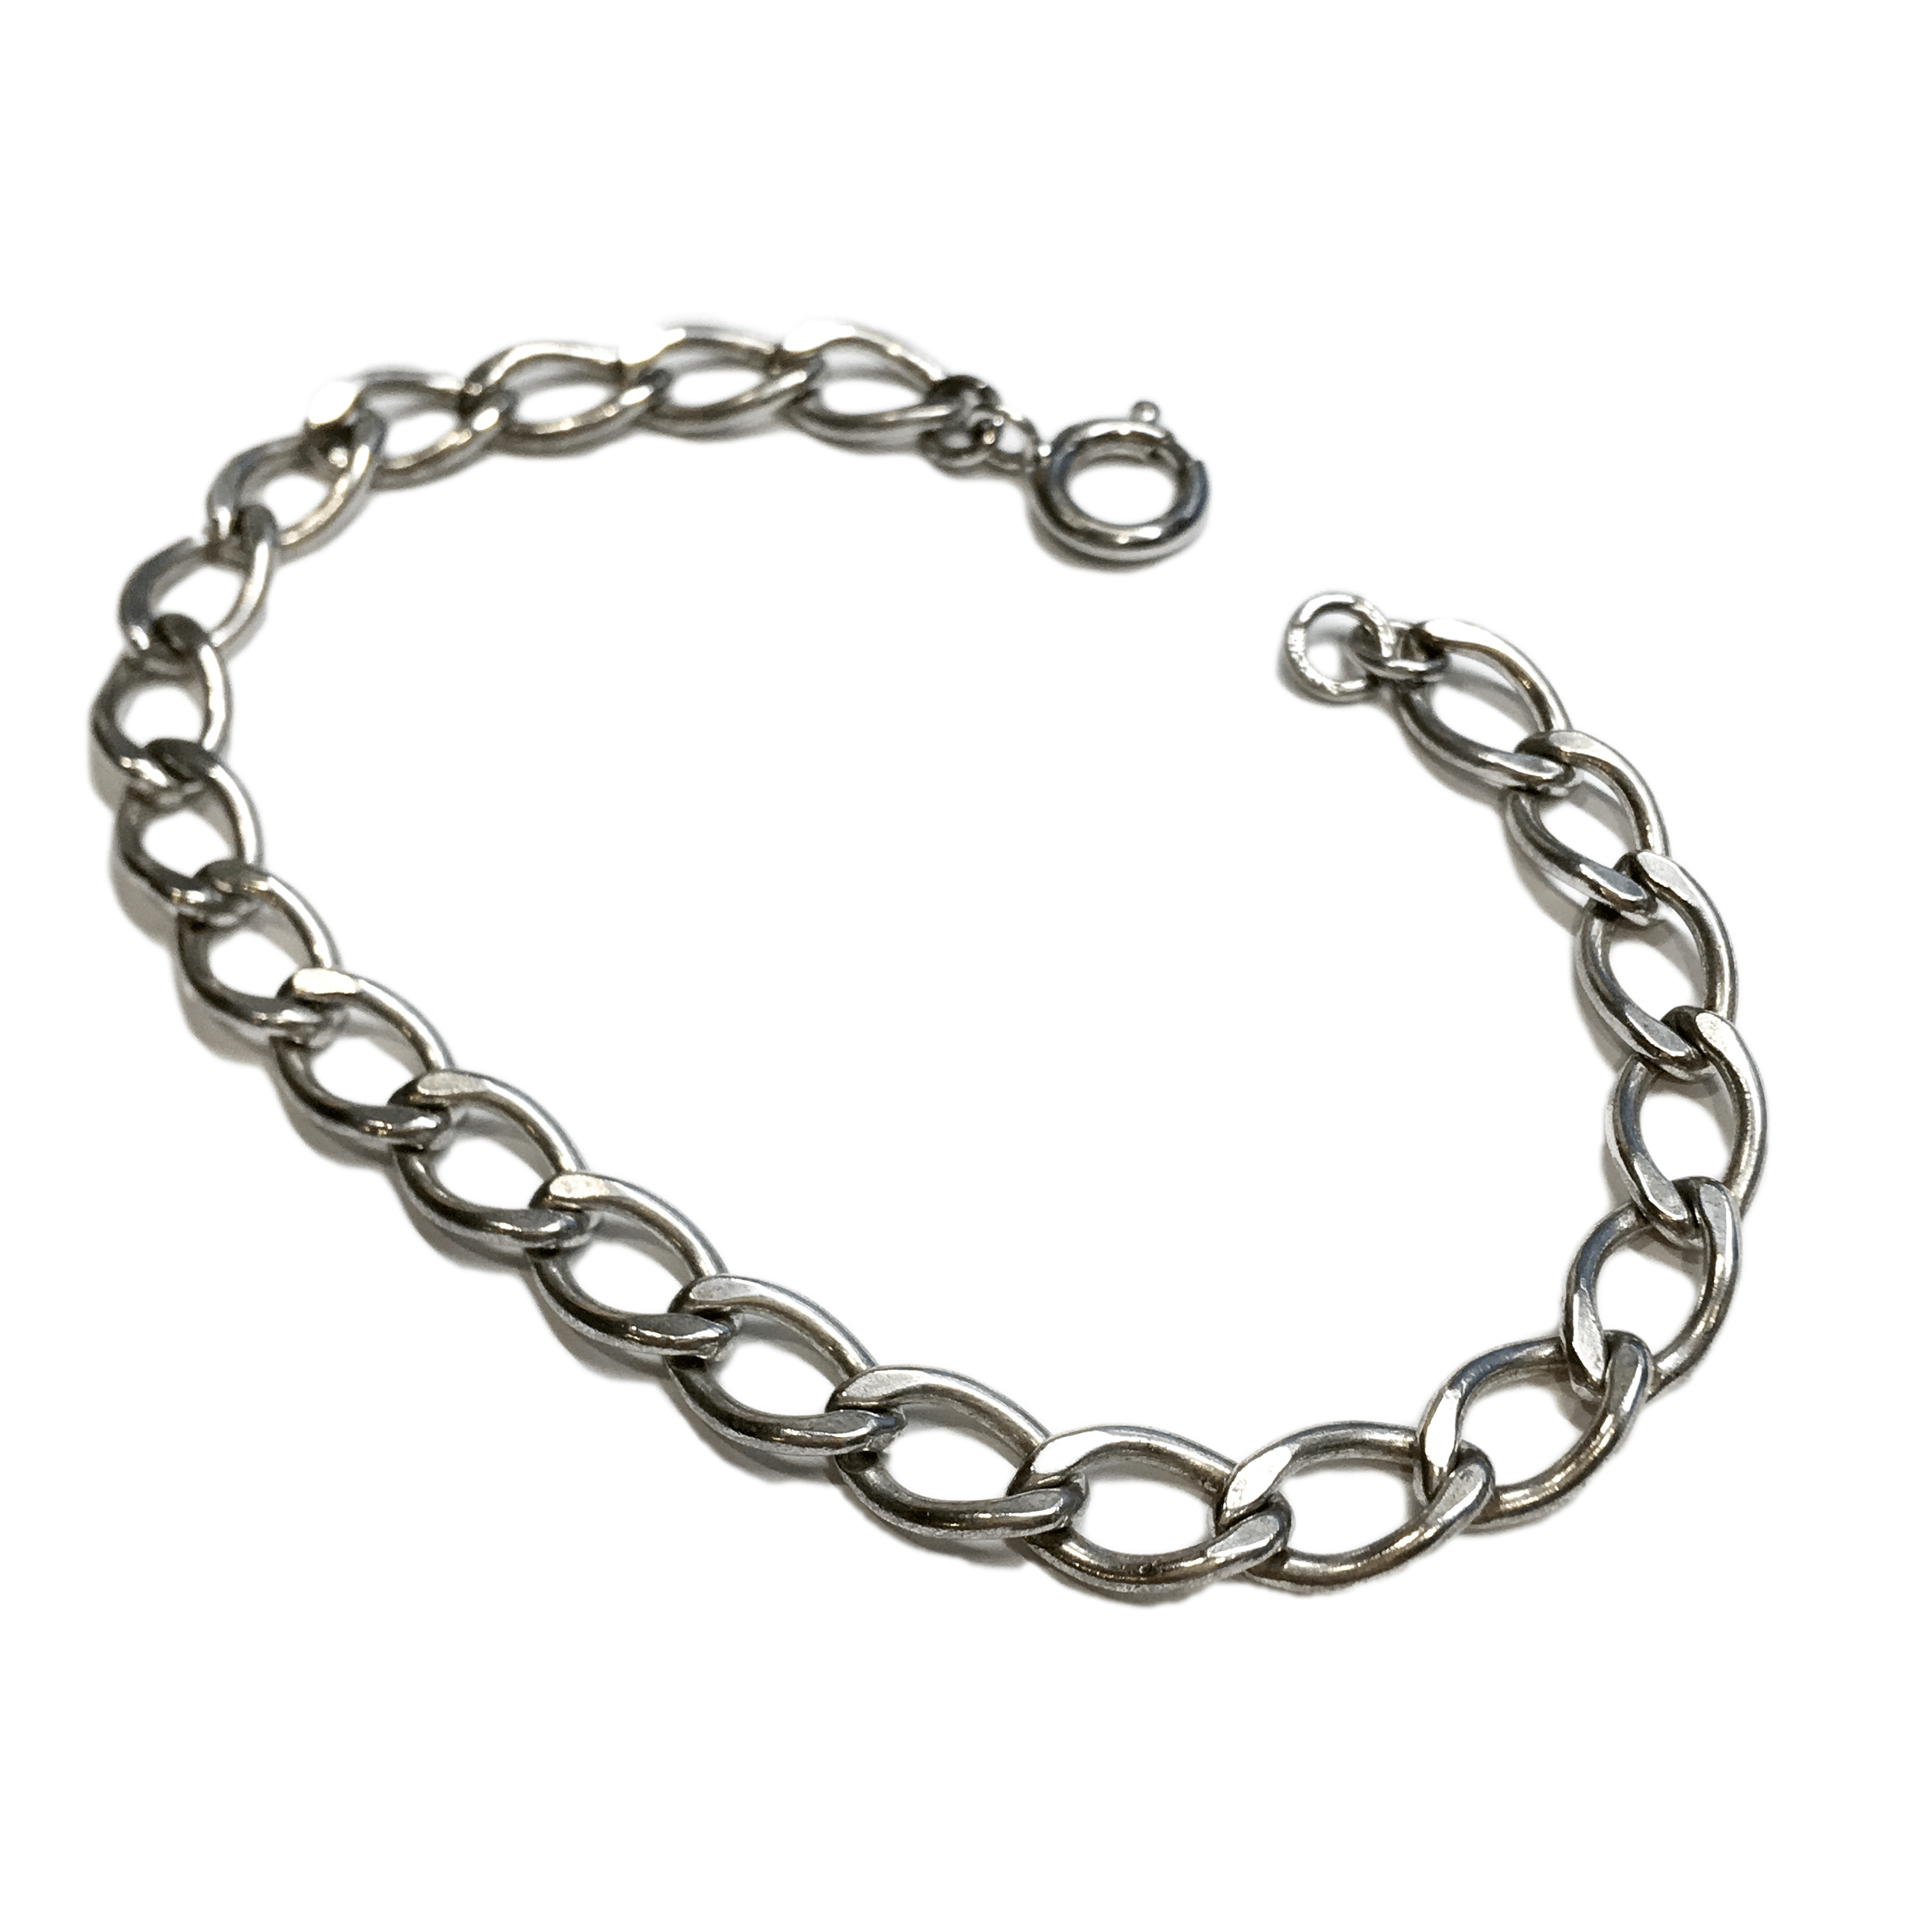 Linda Toggle Heart Charm Bracelet with Diamond in Sterling Silver - MYKA